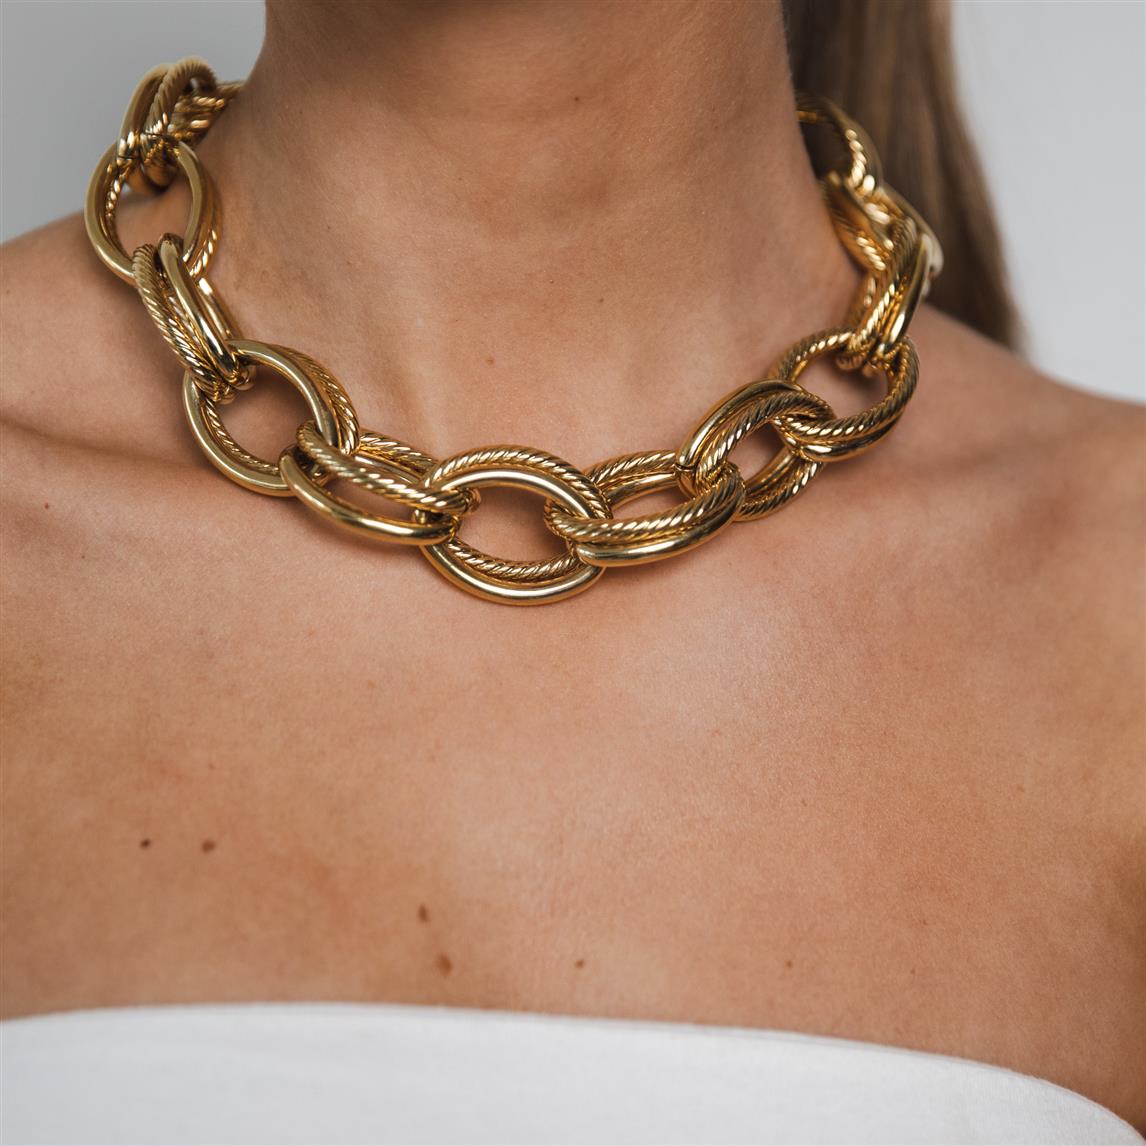 Nikki double chain gold necklace